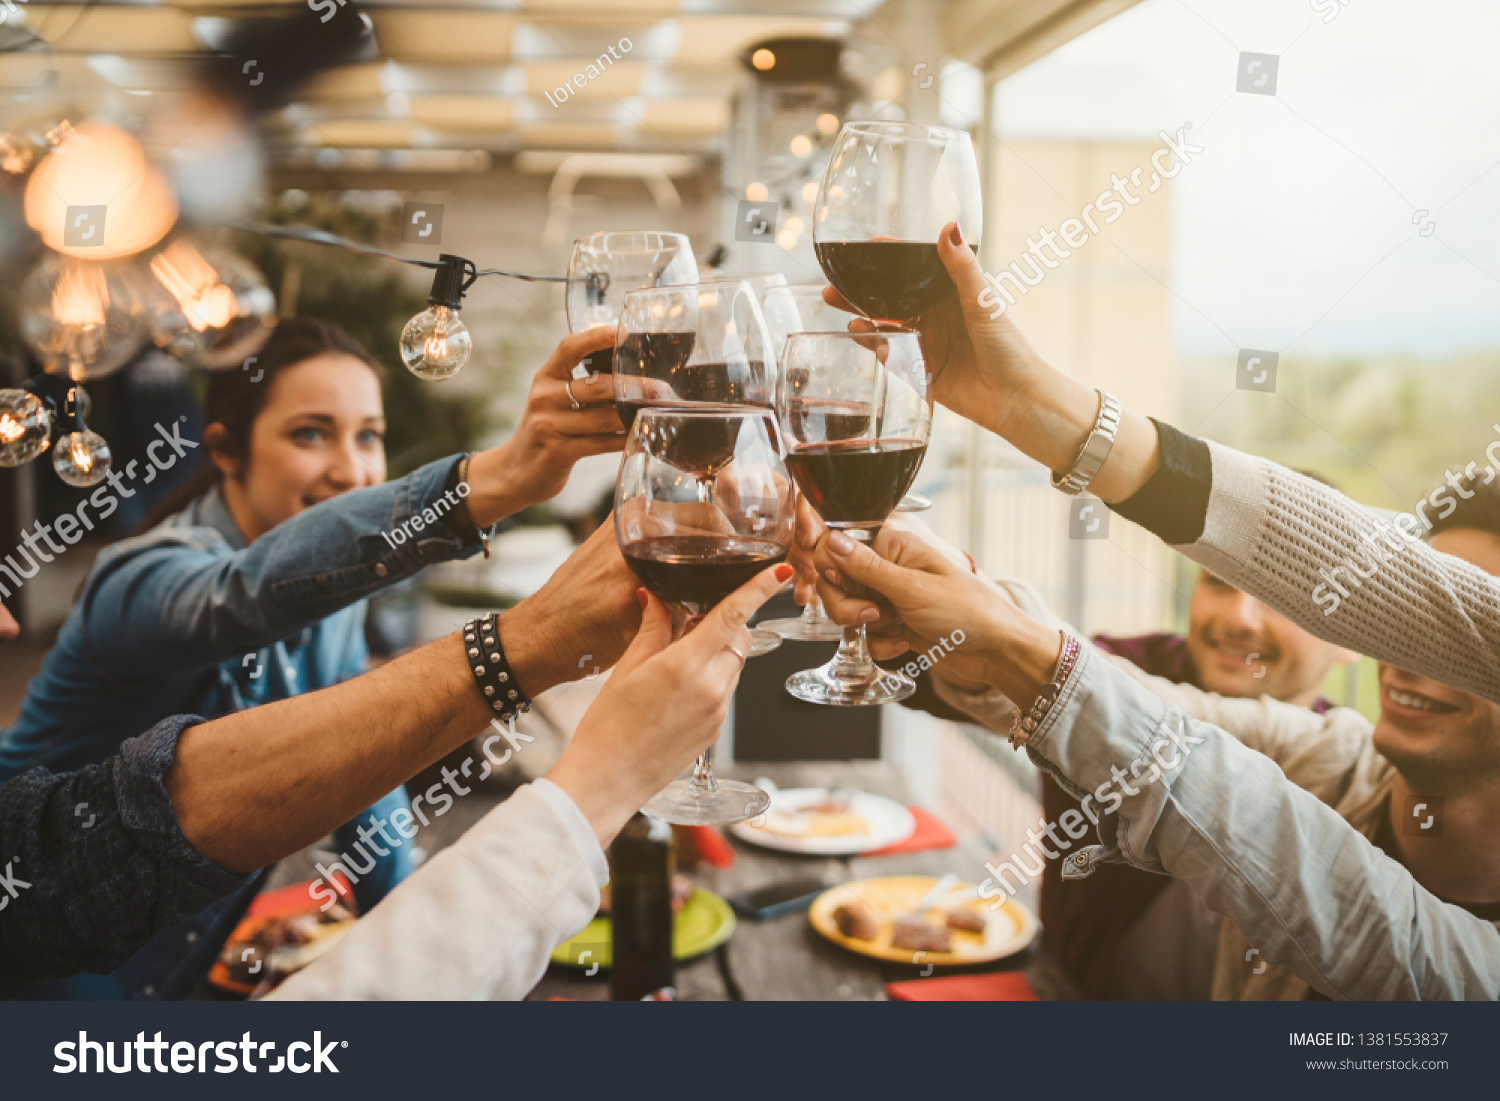 Young friends celebrating at dinner at sunset - Detail of hands while toasting with glasses of wine - Happy people at a terrace party after the harvest before sunset - Concept of friendship #1381553837